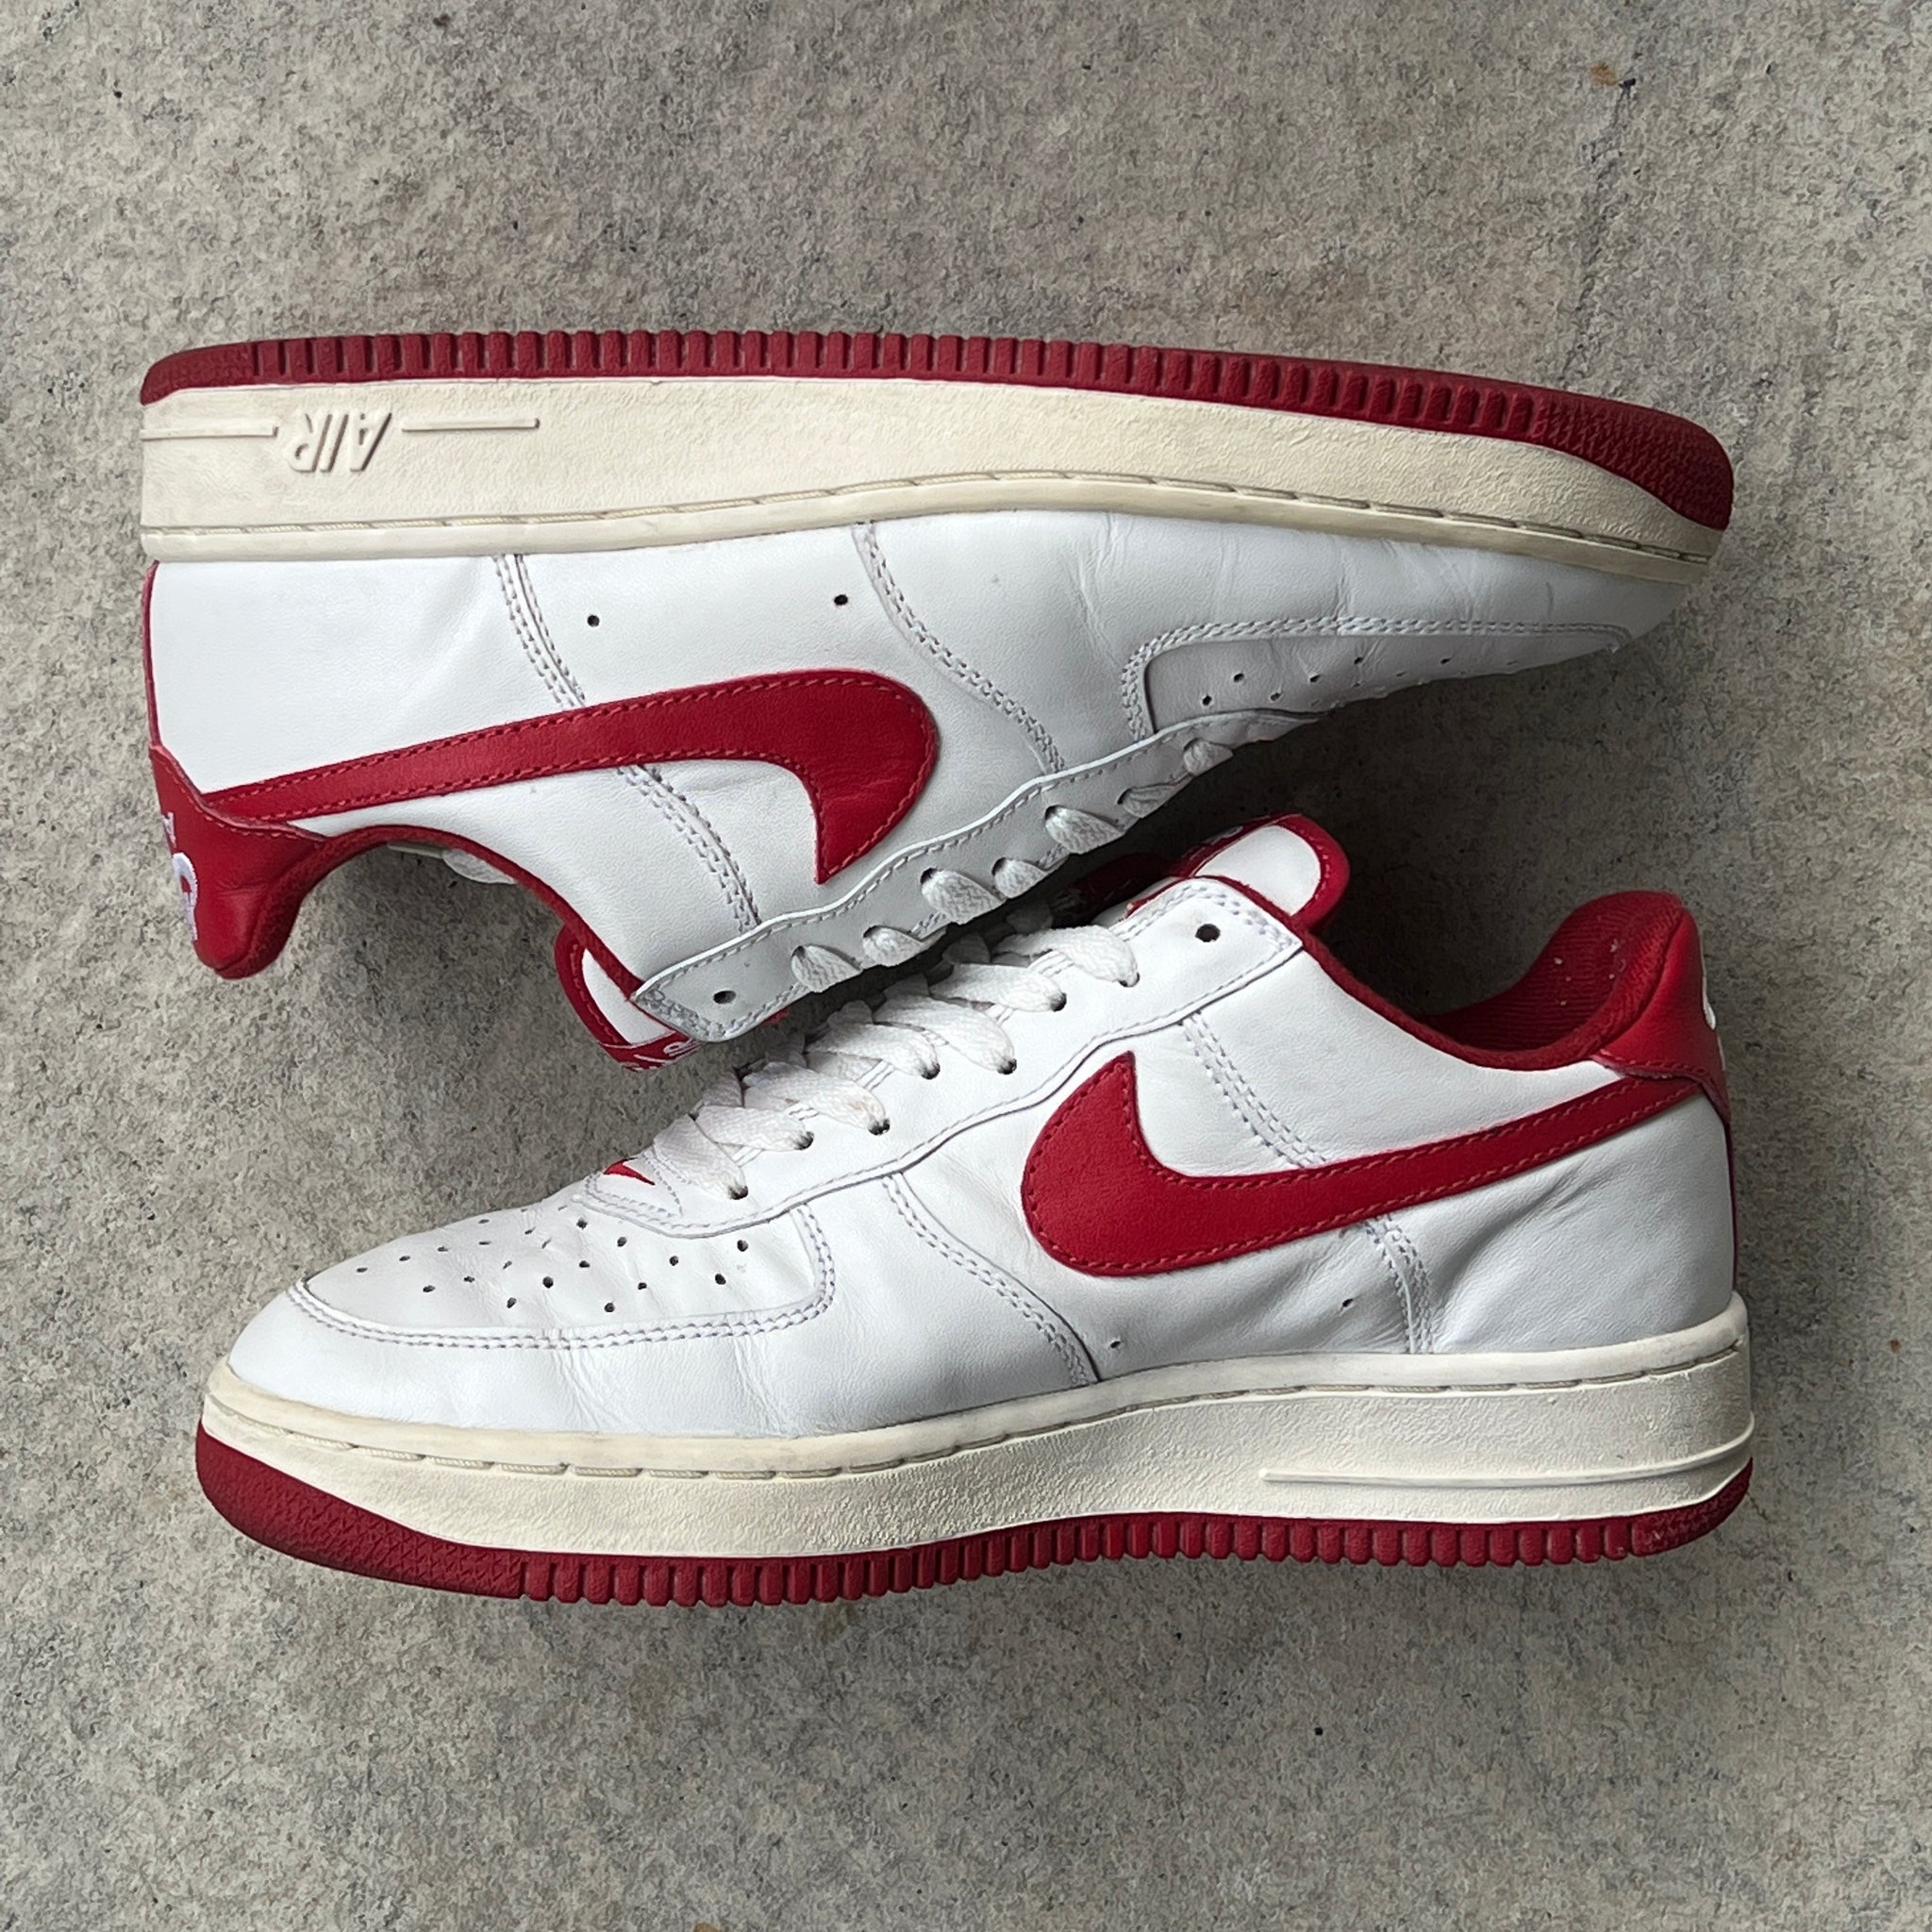 9 US - NIKE AIR FORCE 1 WHITE/RED SAMPLE 1999